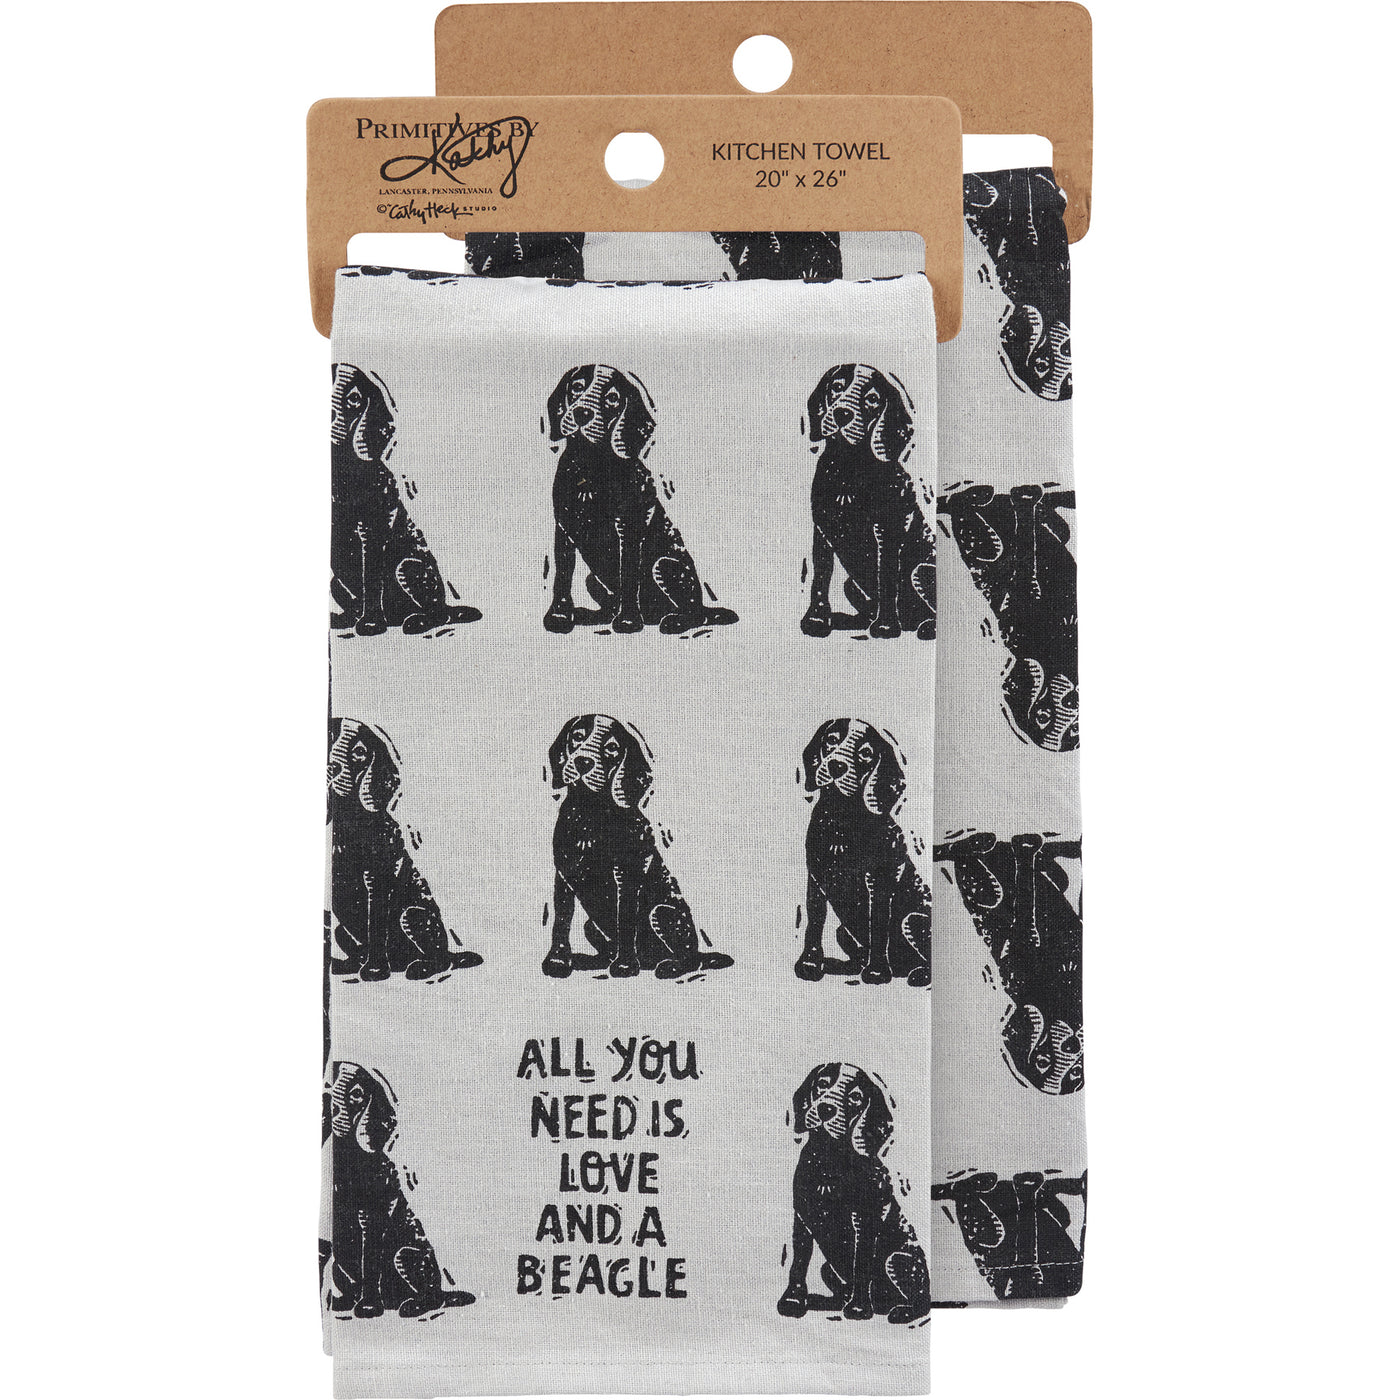 All You Need Is Love And A Beagle Dog Kitchen Towel